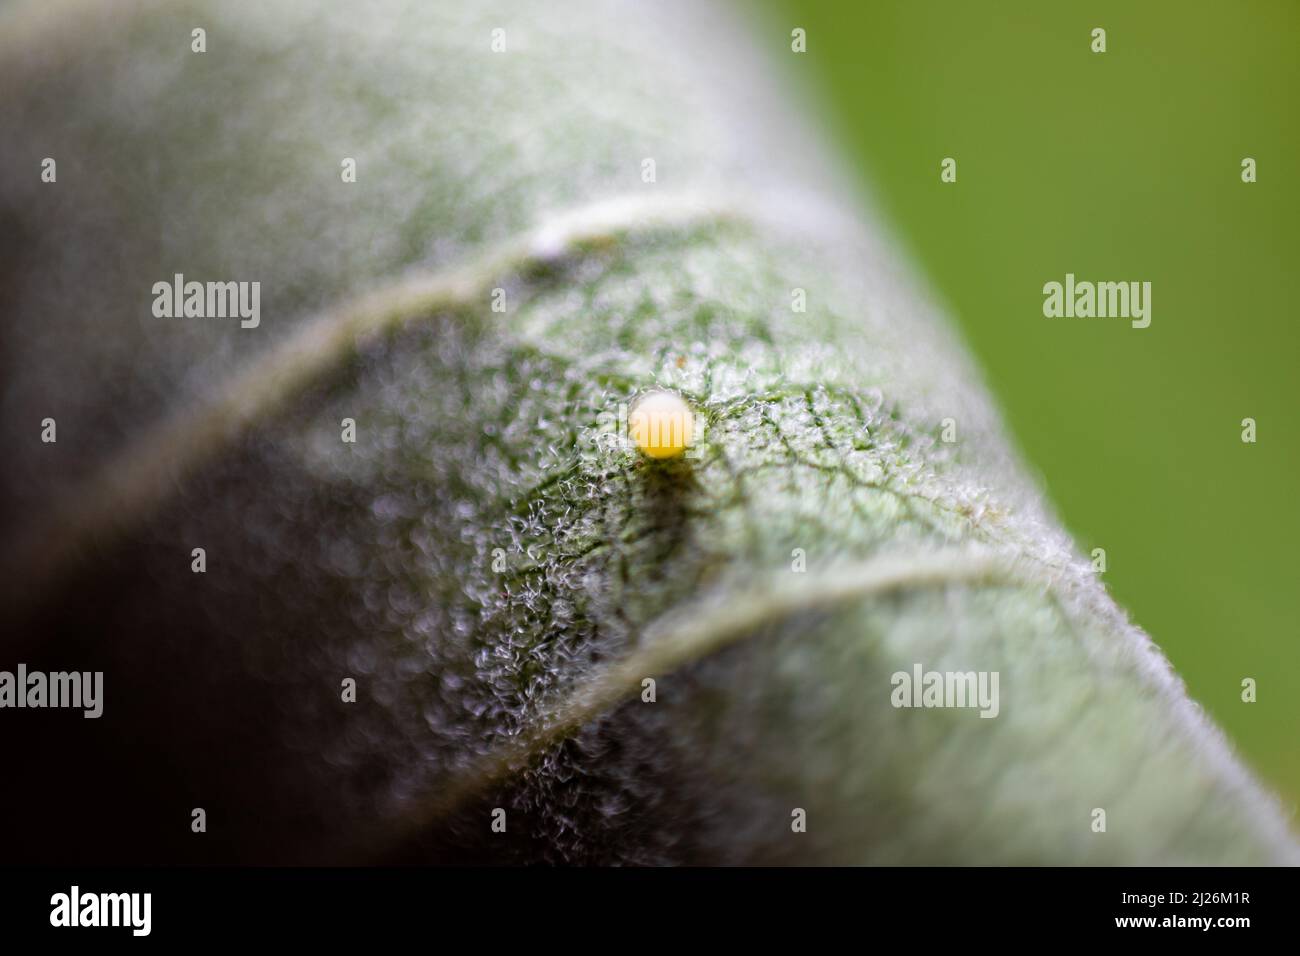 A tiny monarch caterpillar egg on a leaf surface on a blurred background Stock Photo